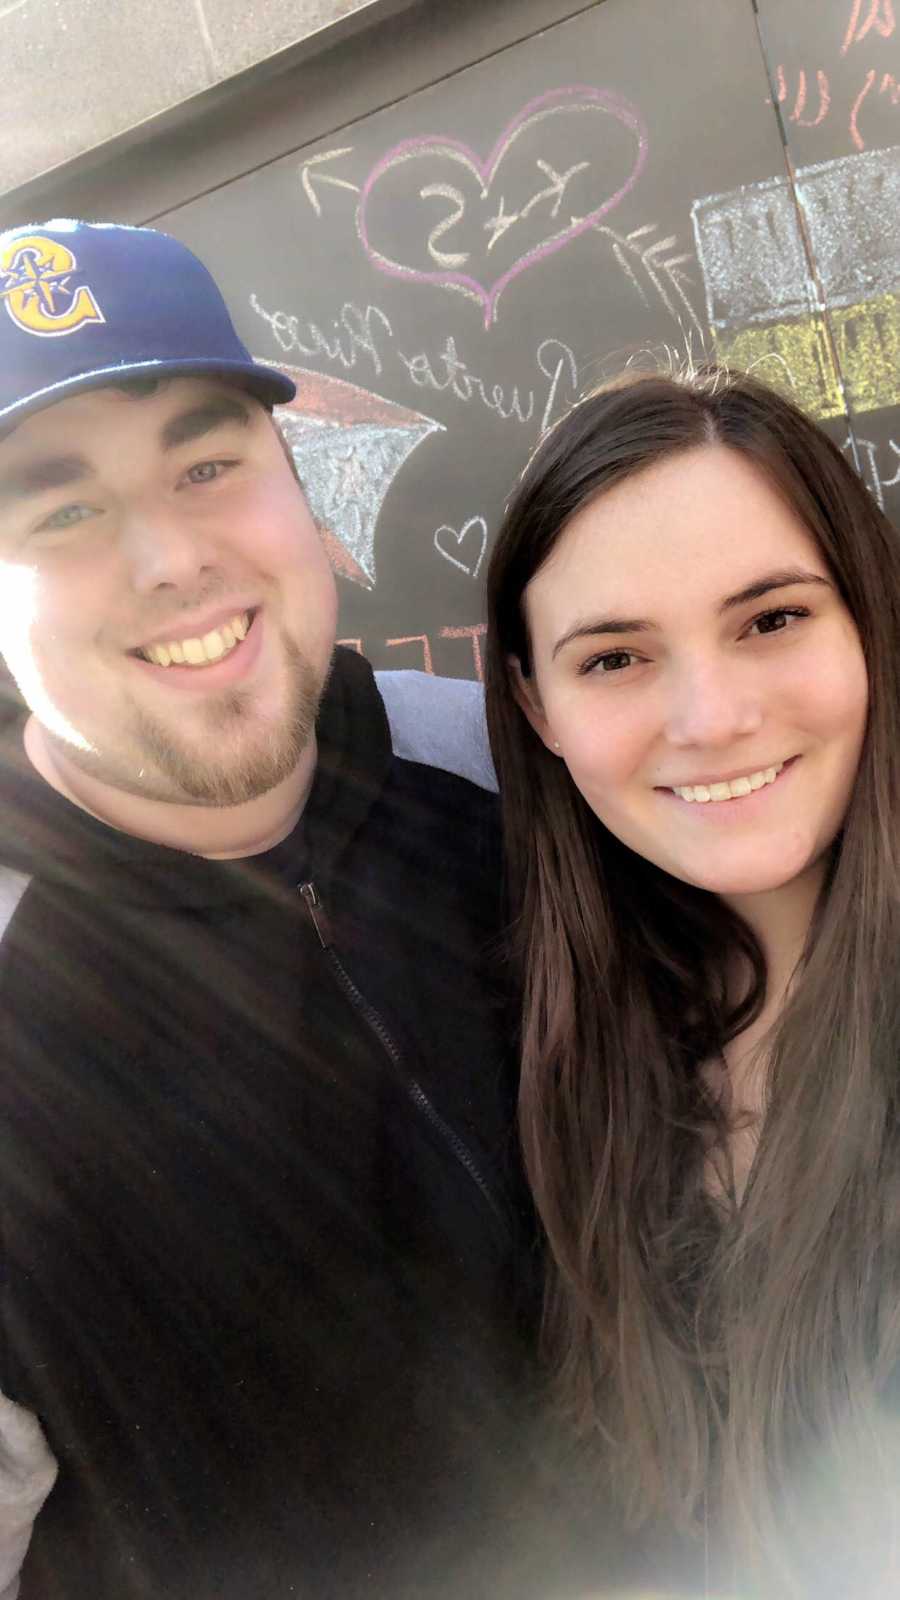 Girlfriend smiles in selfie with boyfriend who made her a Harry Potter themed trunk